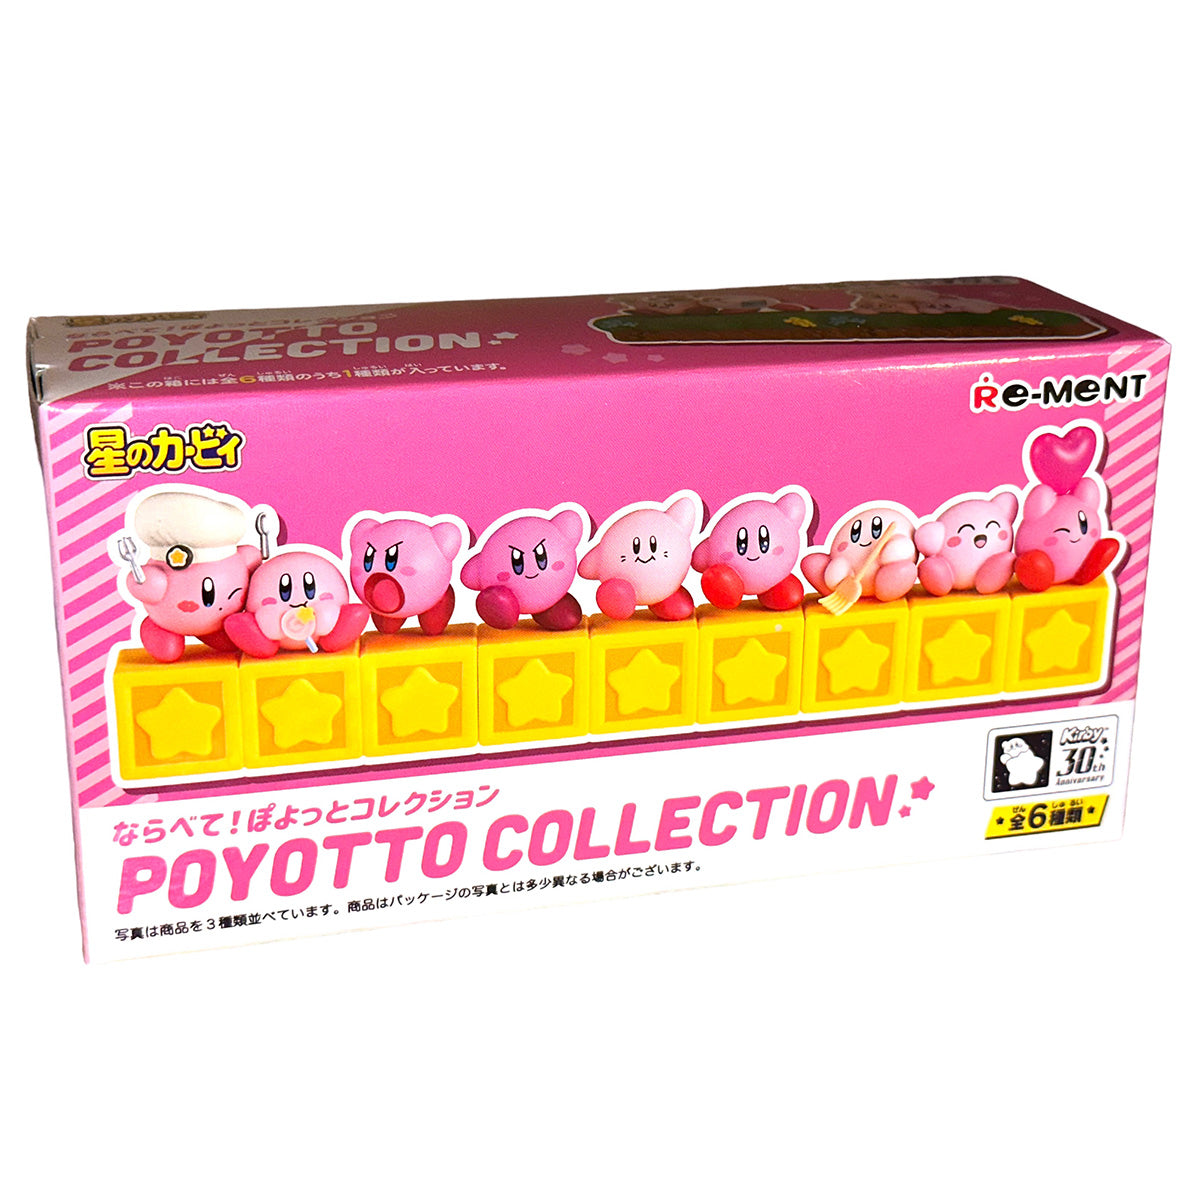 LIE DOWN - Kirby 30th Anniversary Poyotto Collection RE-MENT Figure #3 USA SHIP!